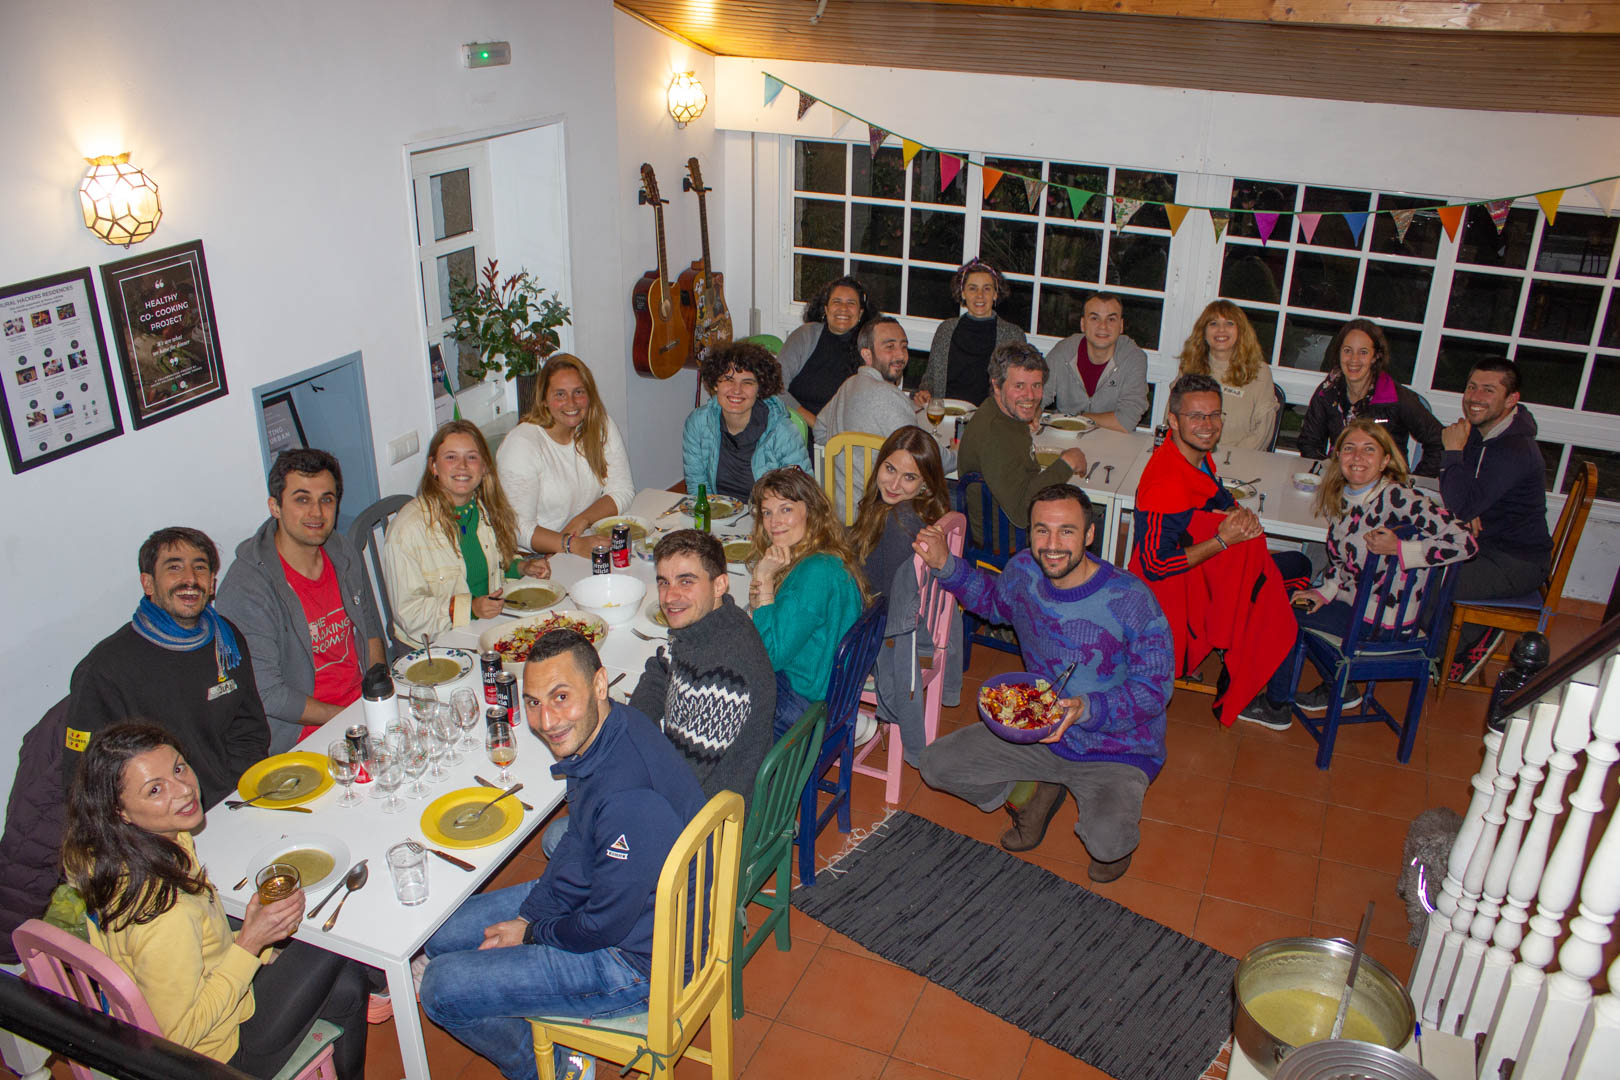 The ECHN community having dinner in Anceu Coliving - 'Entre Culturas' Event